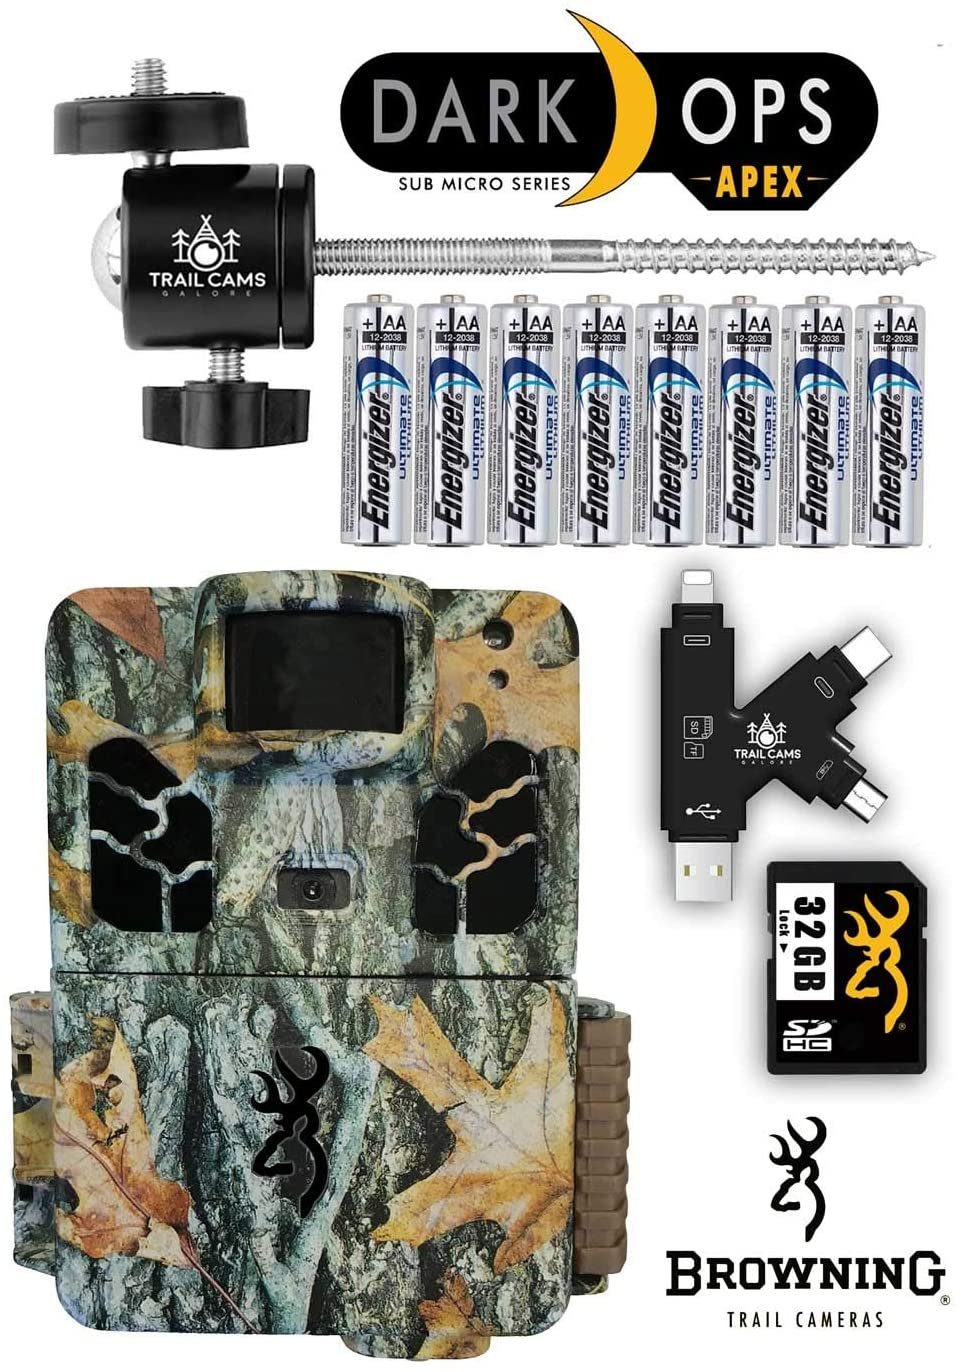 Browning Dark Ops Apex Trail Camera with Batteries, SD Card, Card Reader, and Mount - image 1 of 5